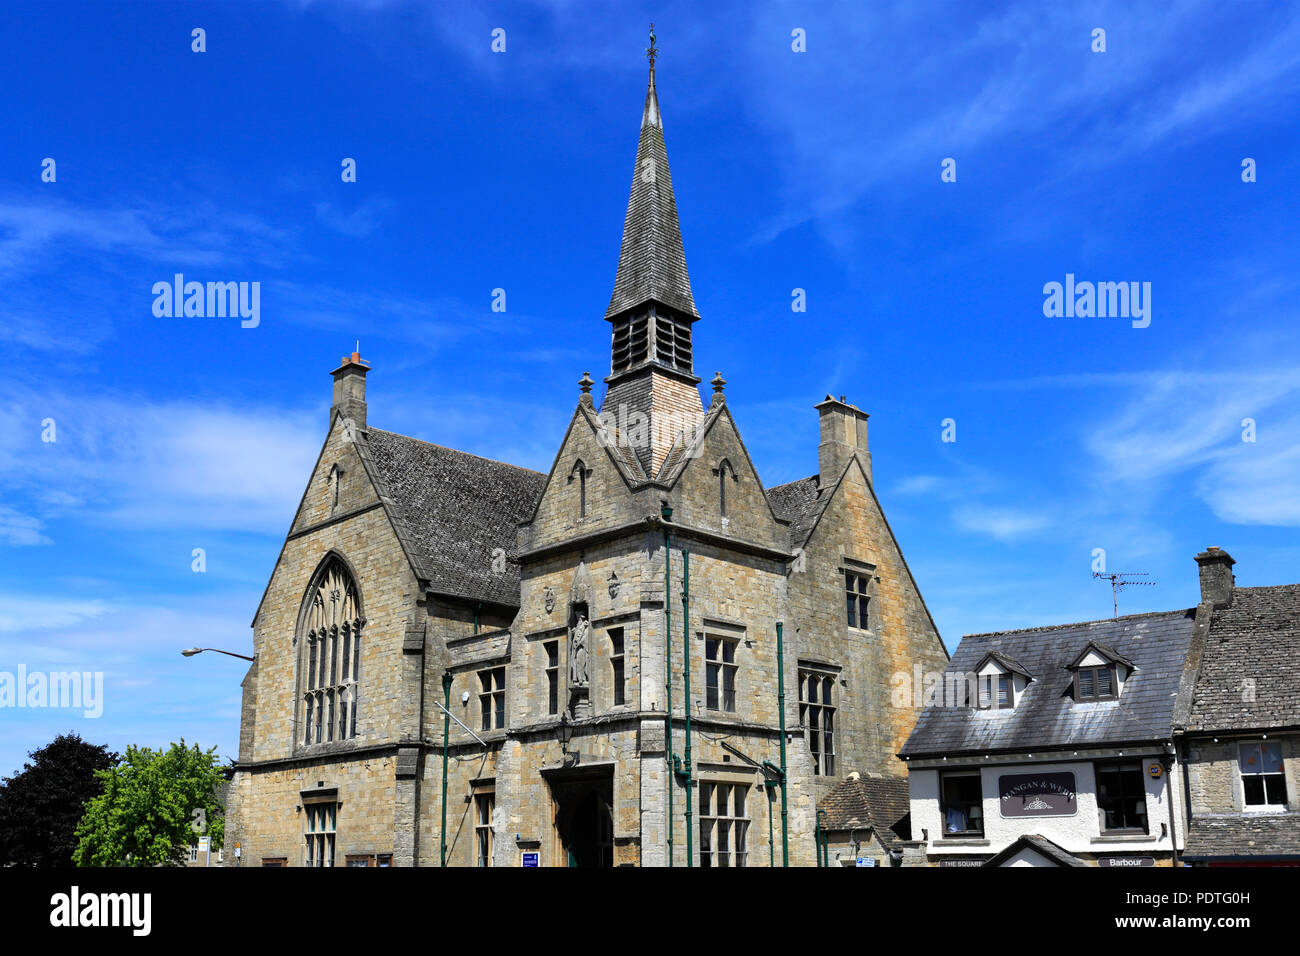 The Market Hall, Stow on the Wold Town, Gloucestershire, Cotswolds, England Stock Photo